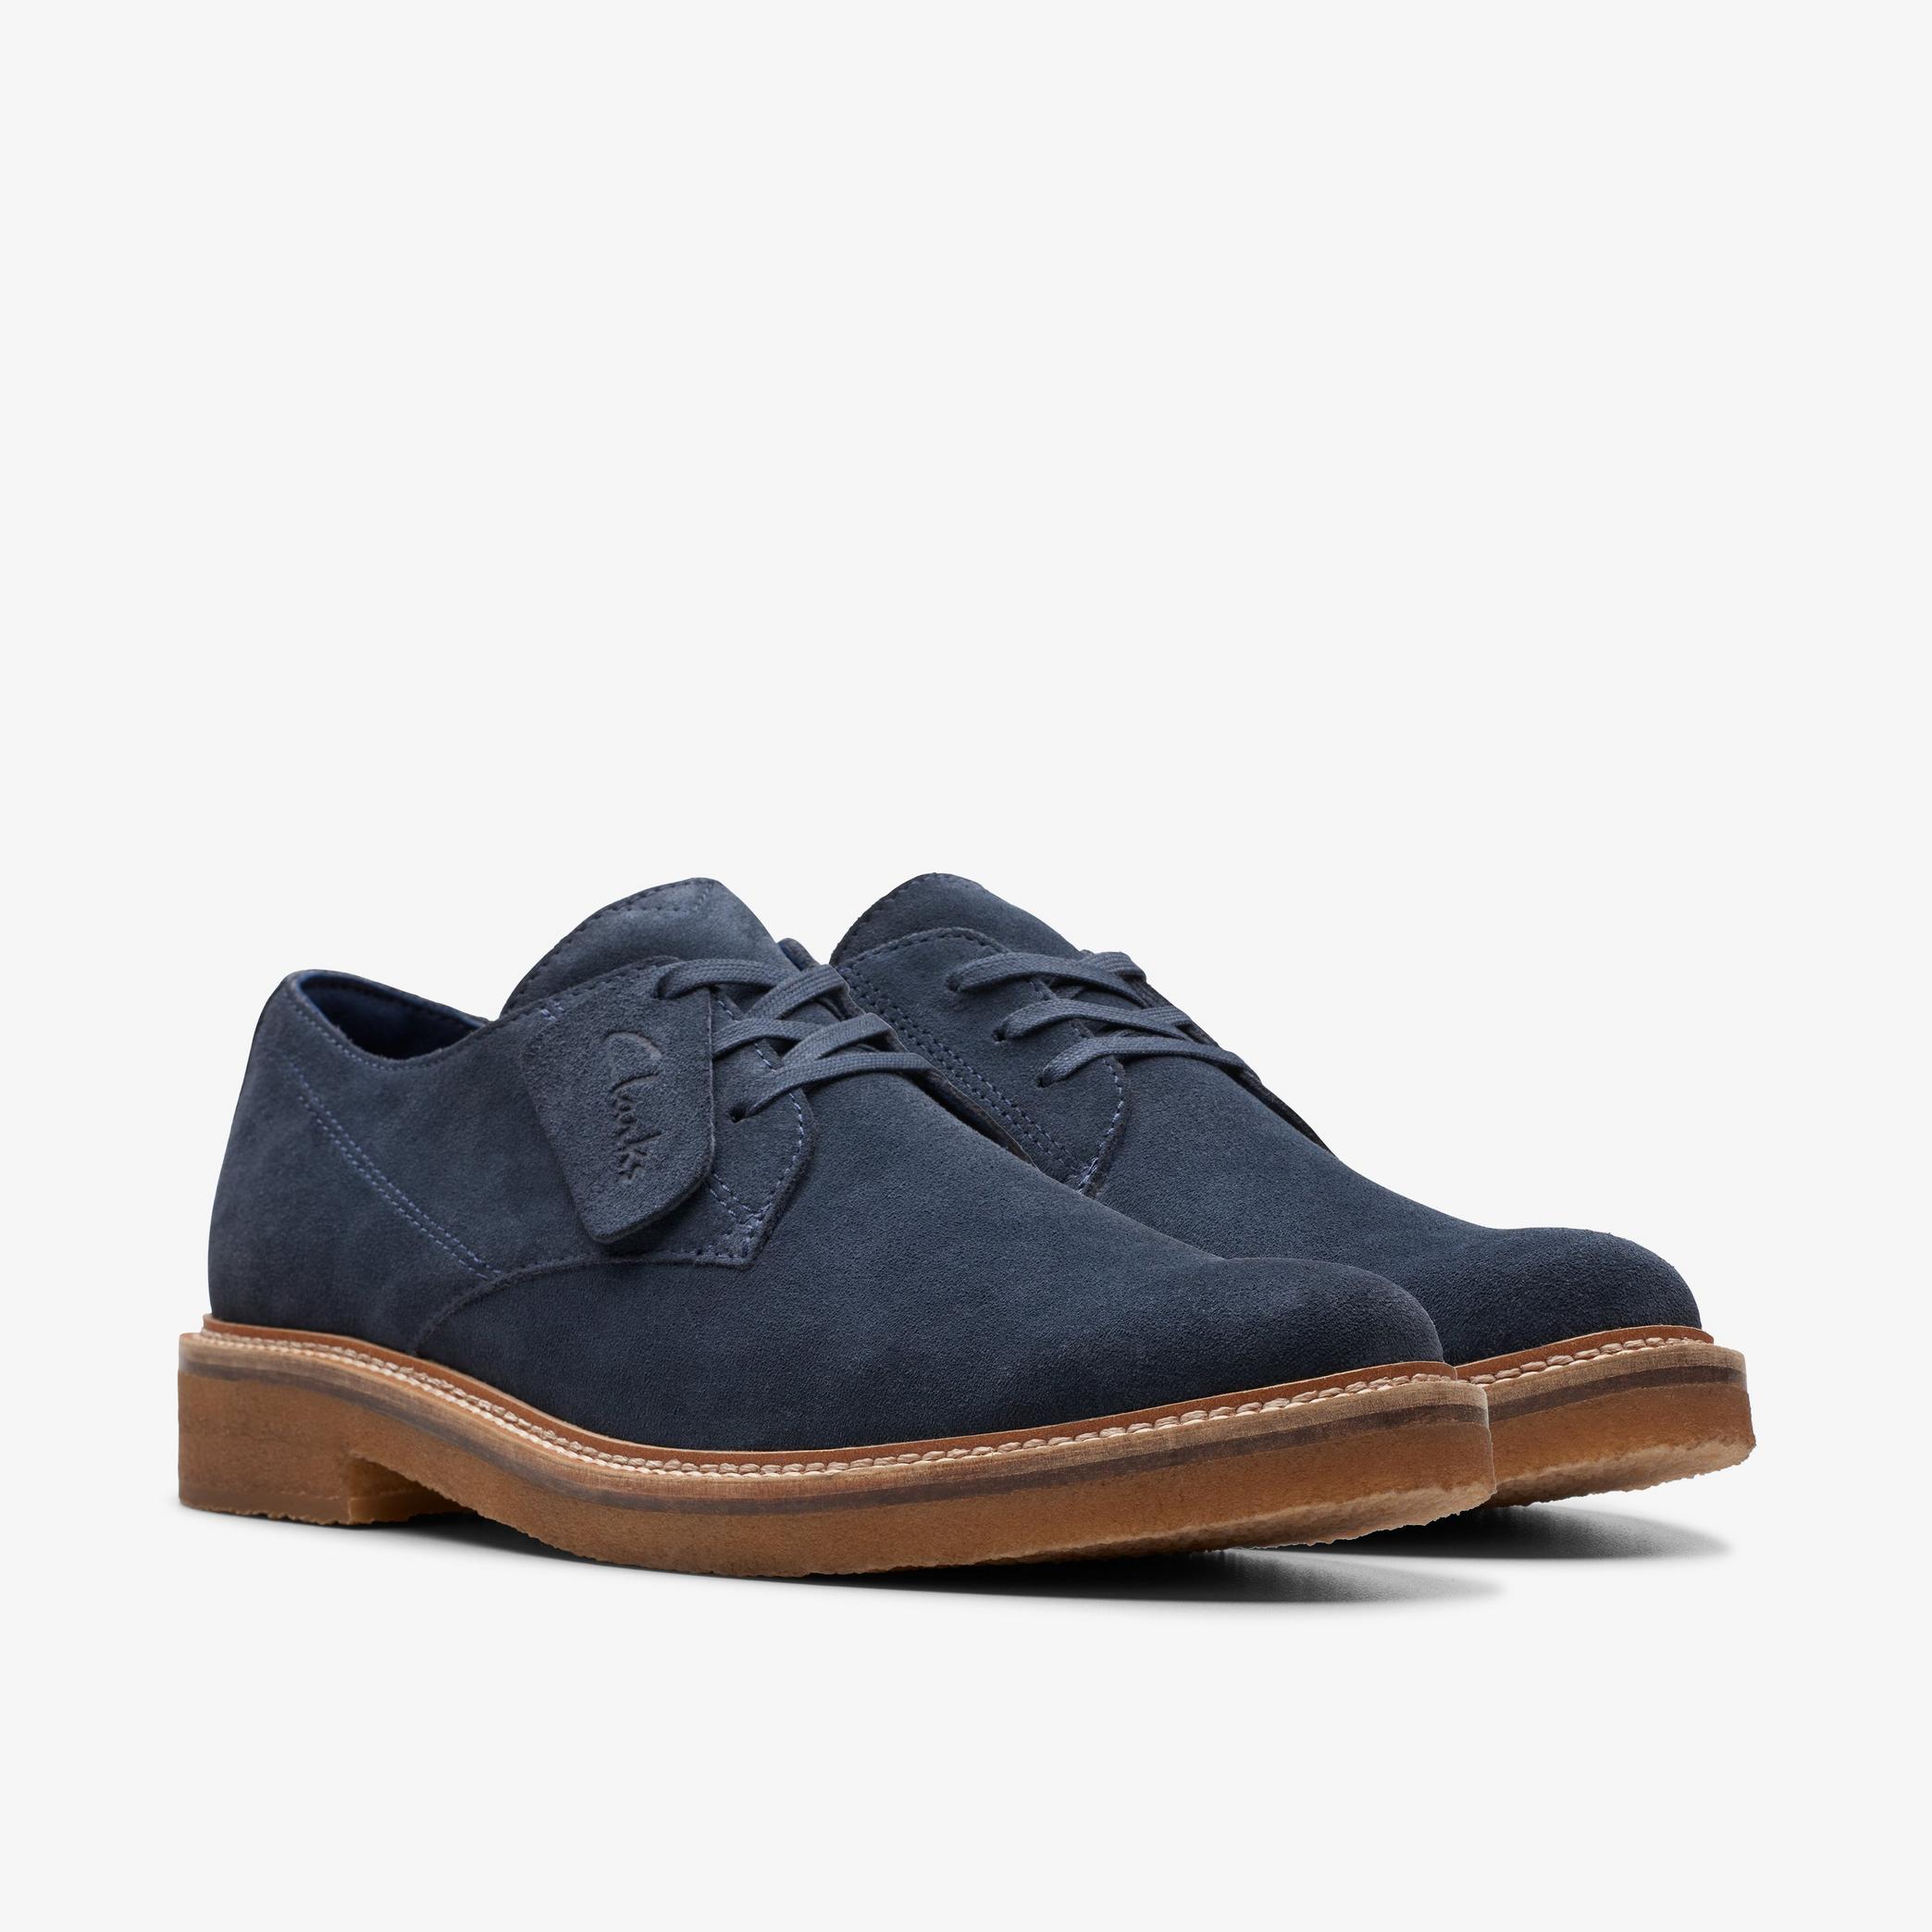 Clarkdale Derby Navy Suede Oxford Shoes, view 4 of 6